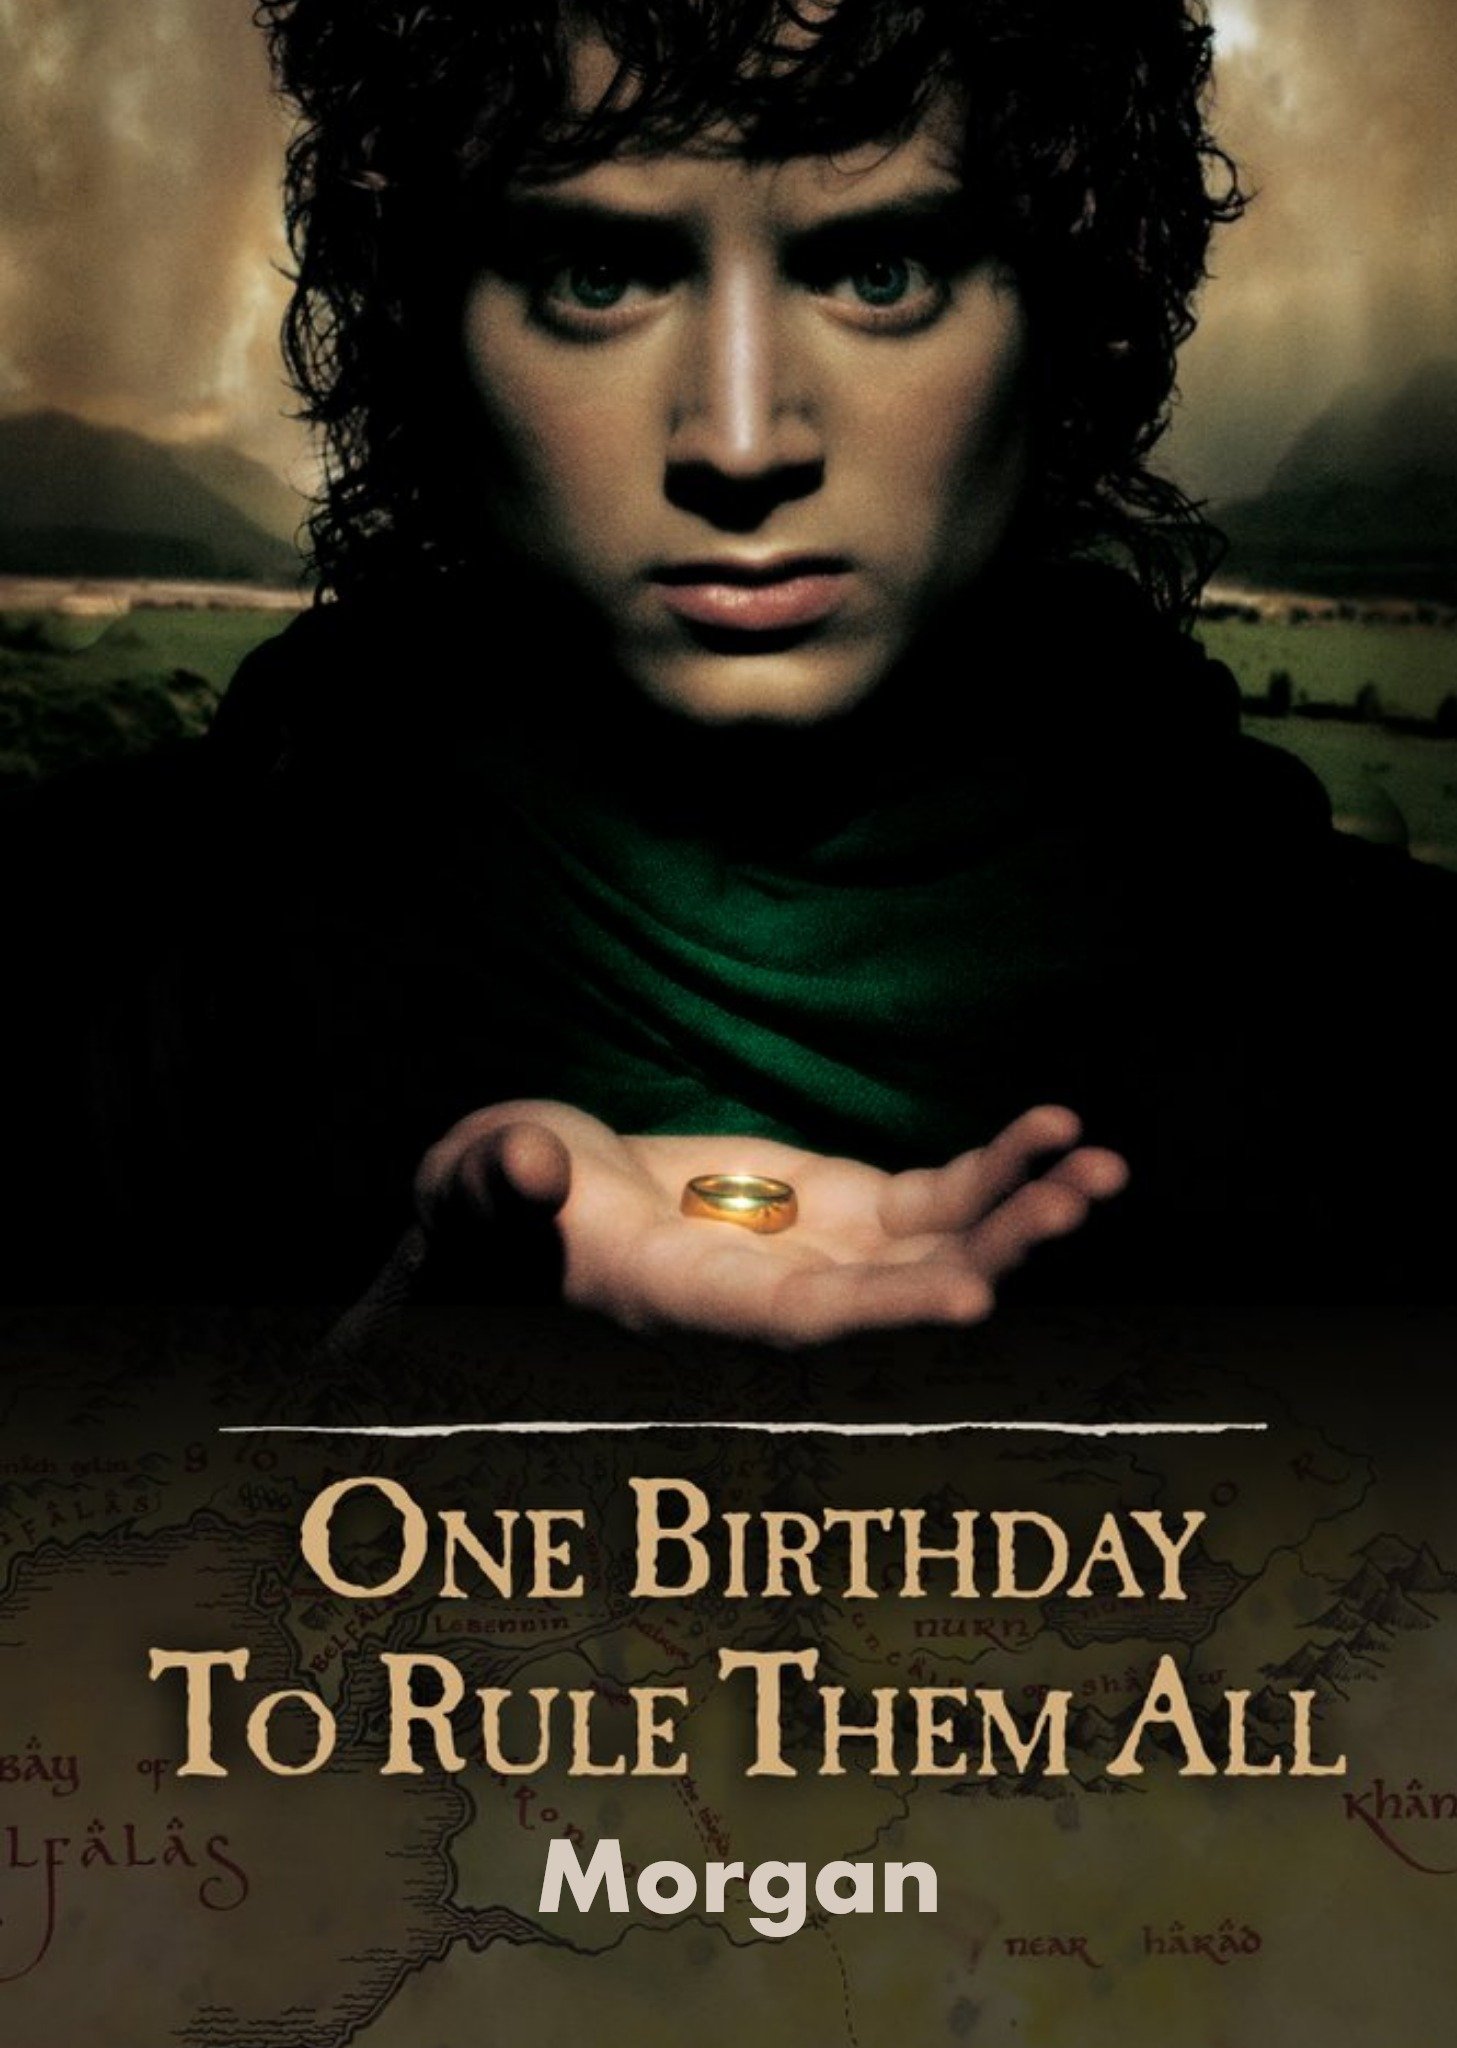 Lord Of The Rings One Birthday To Rule Them All Frodo Baggins Card From Warner Brothers Ecard